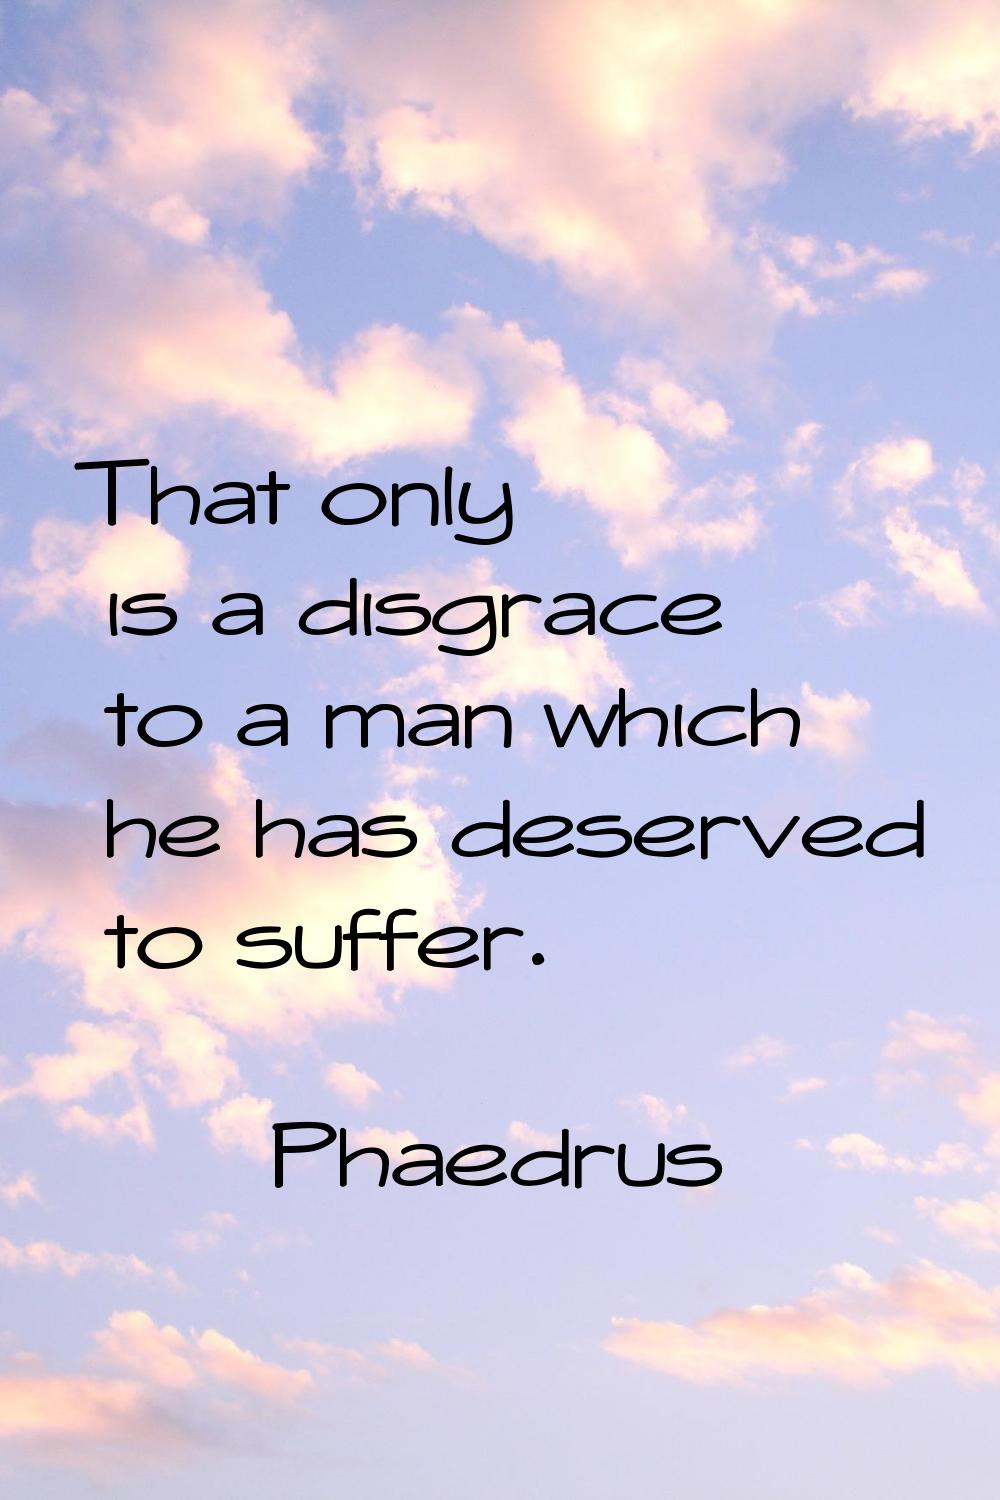 That only is a disgrace to a man which he has deserved to suffer.